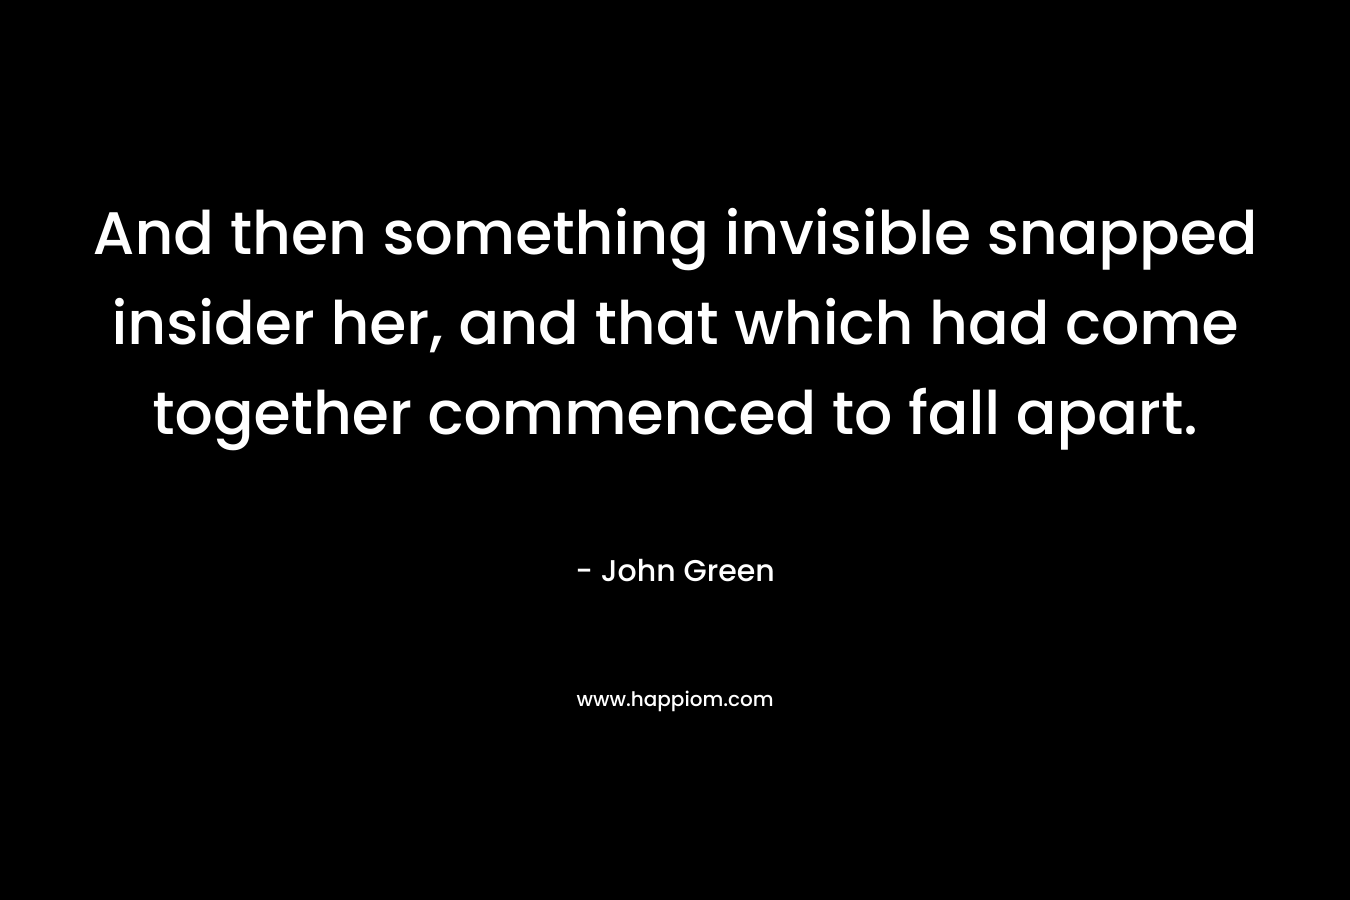 And then something invisible snapped insider her, and that which had come together commenced to fall apart. – John Green